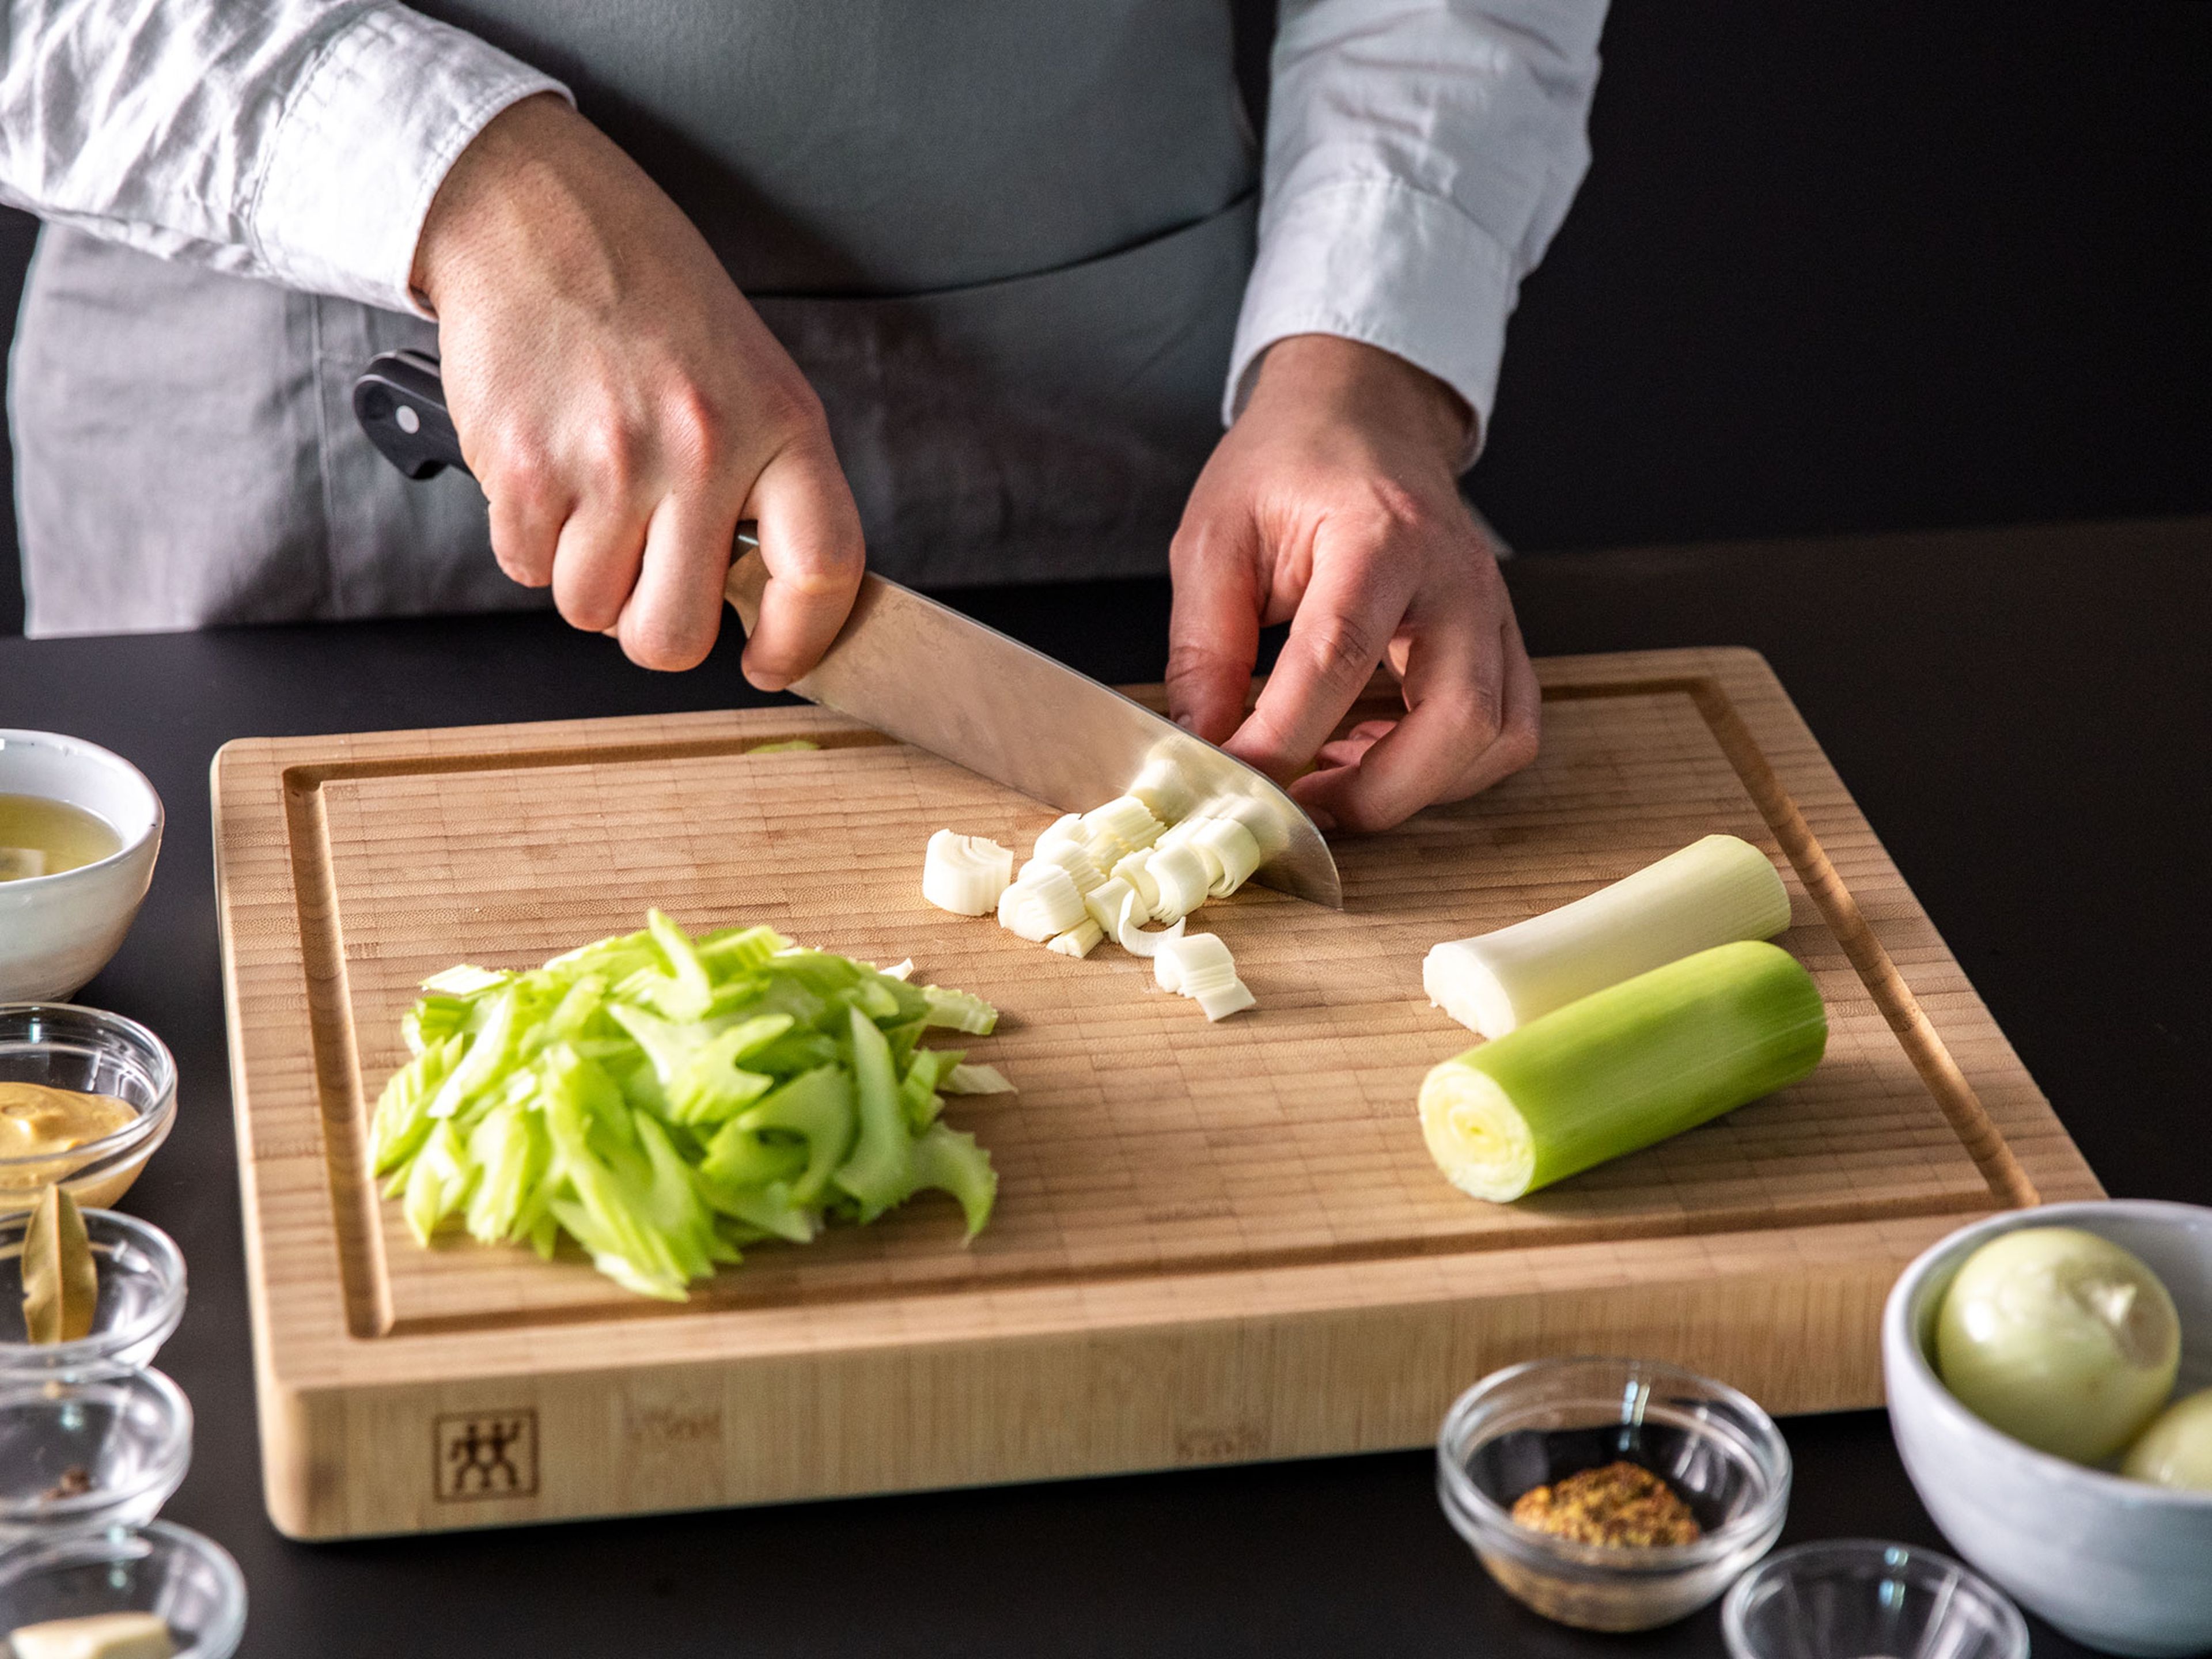 Thoroughly rinse the leek, finely chop the dill, and peel garlic and onions. Dice the garlic, onions, leek, and celery. Slice the fish into bite-sized pieces and pat dry with paper towels.